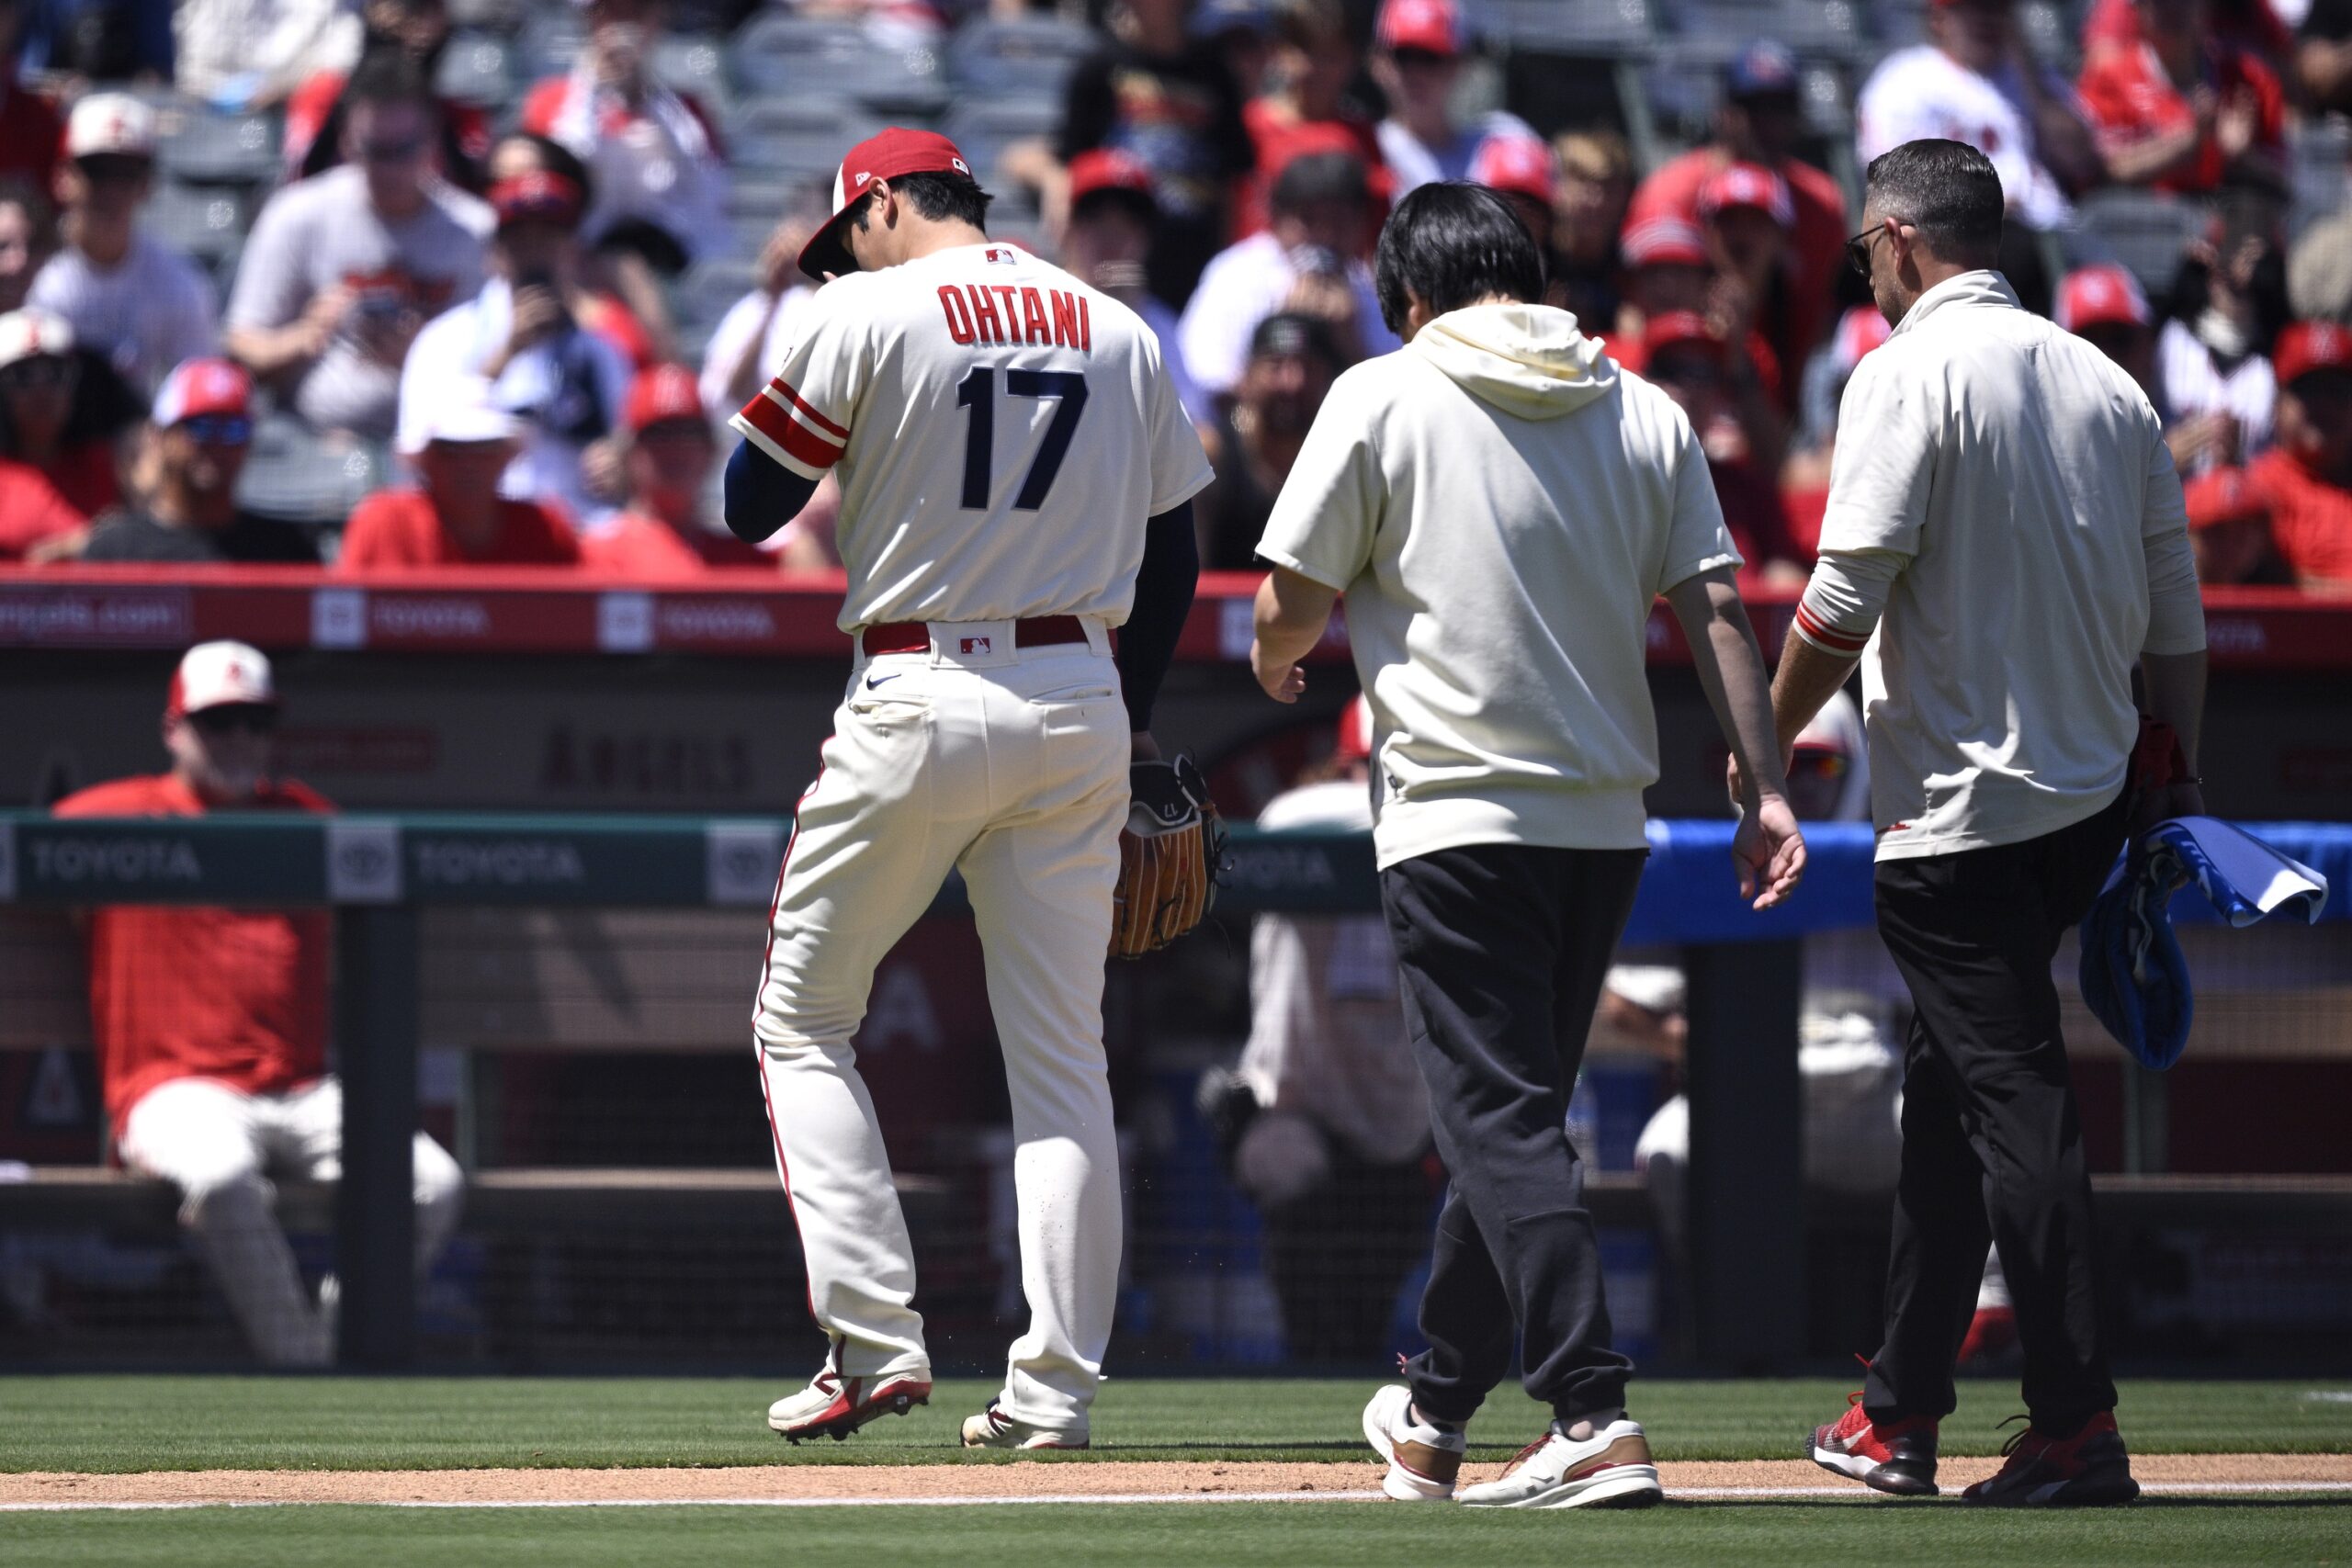 Dodgers Top Offseason Target Shohei Ohtani Injured in Angels Doubleheader,  Won't Pitch Again This Year